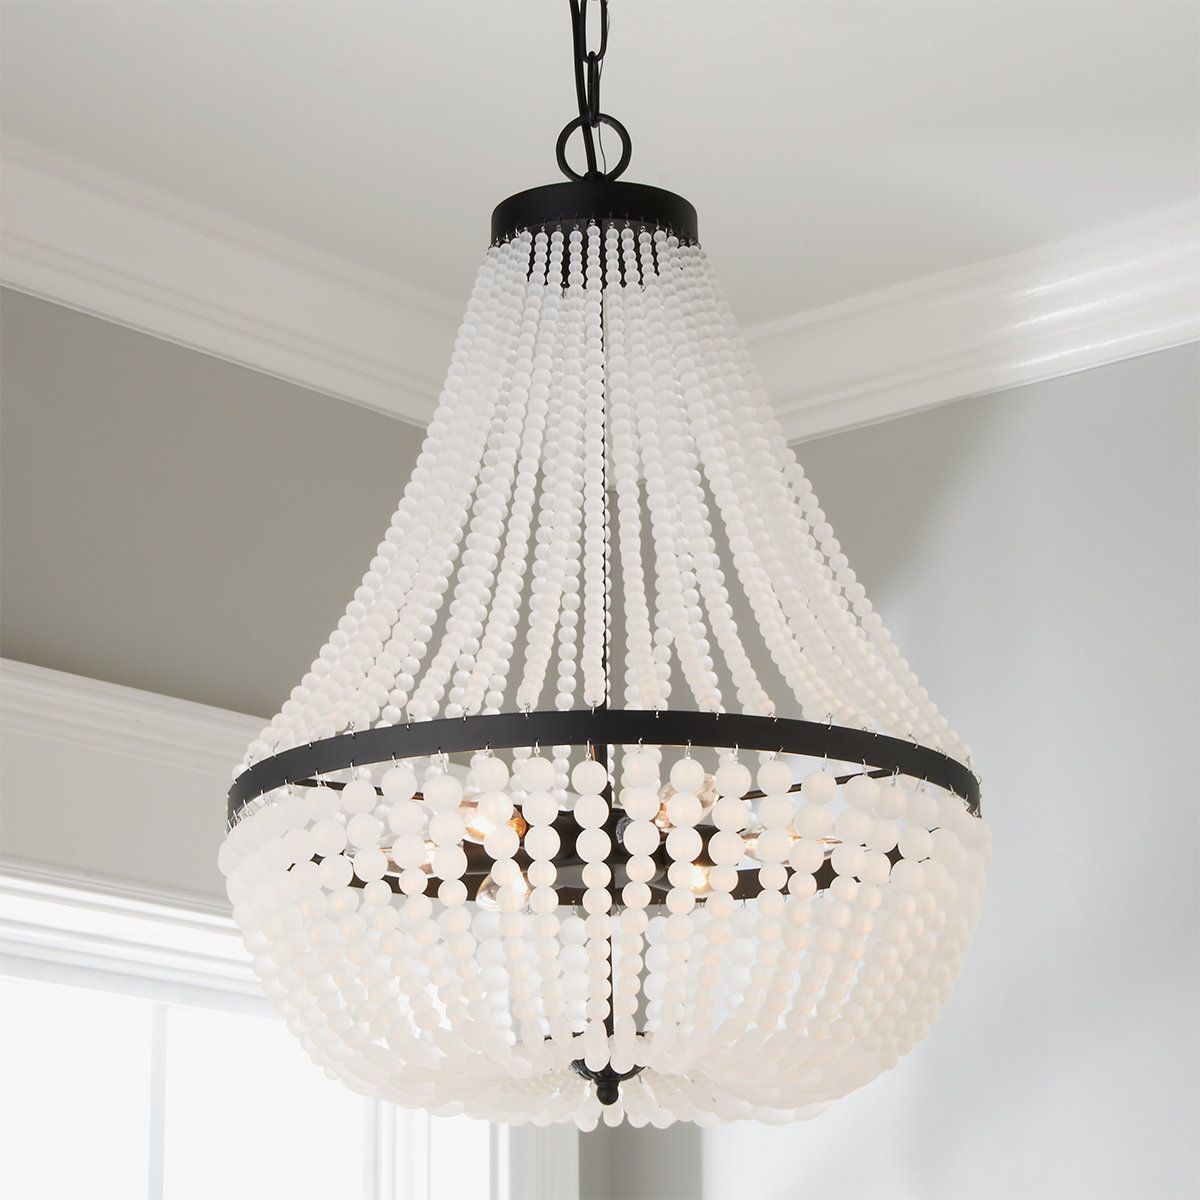 Check Out Timeless Frosted Beads Basket Chandelier From In Tiana 4 Light Geometric Chandeliers (View 30 of 30)